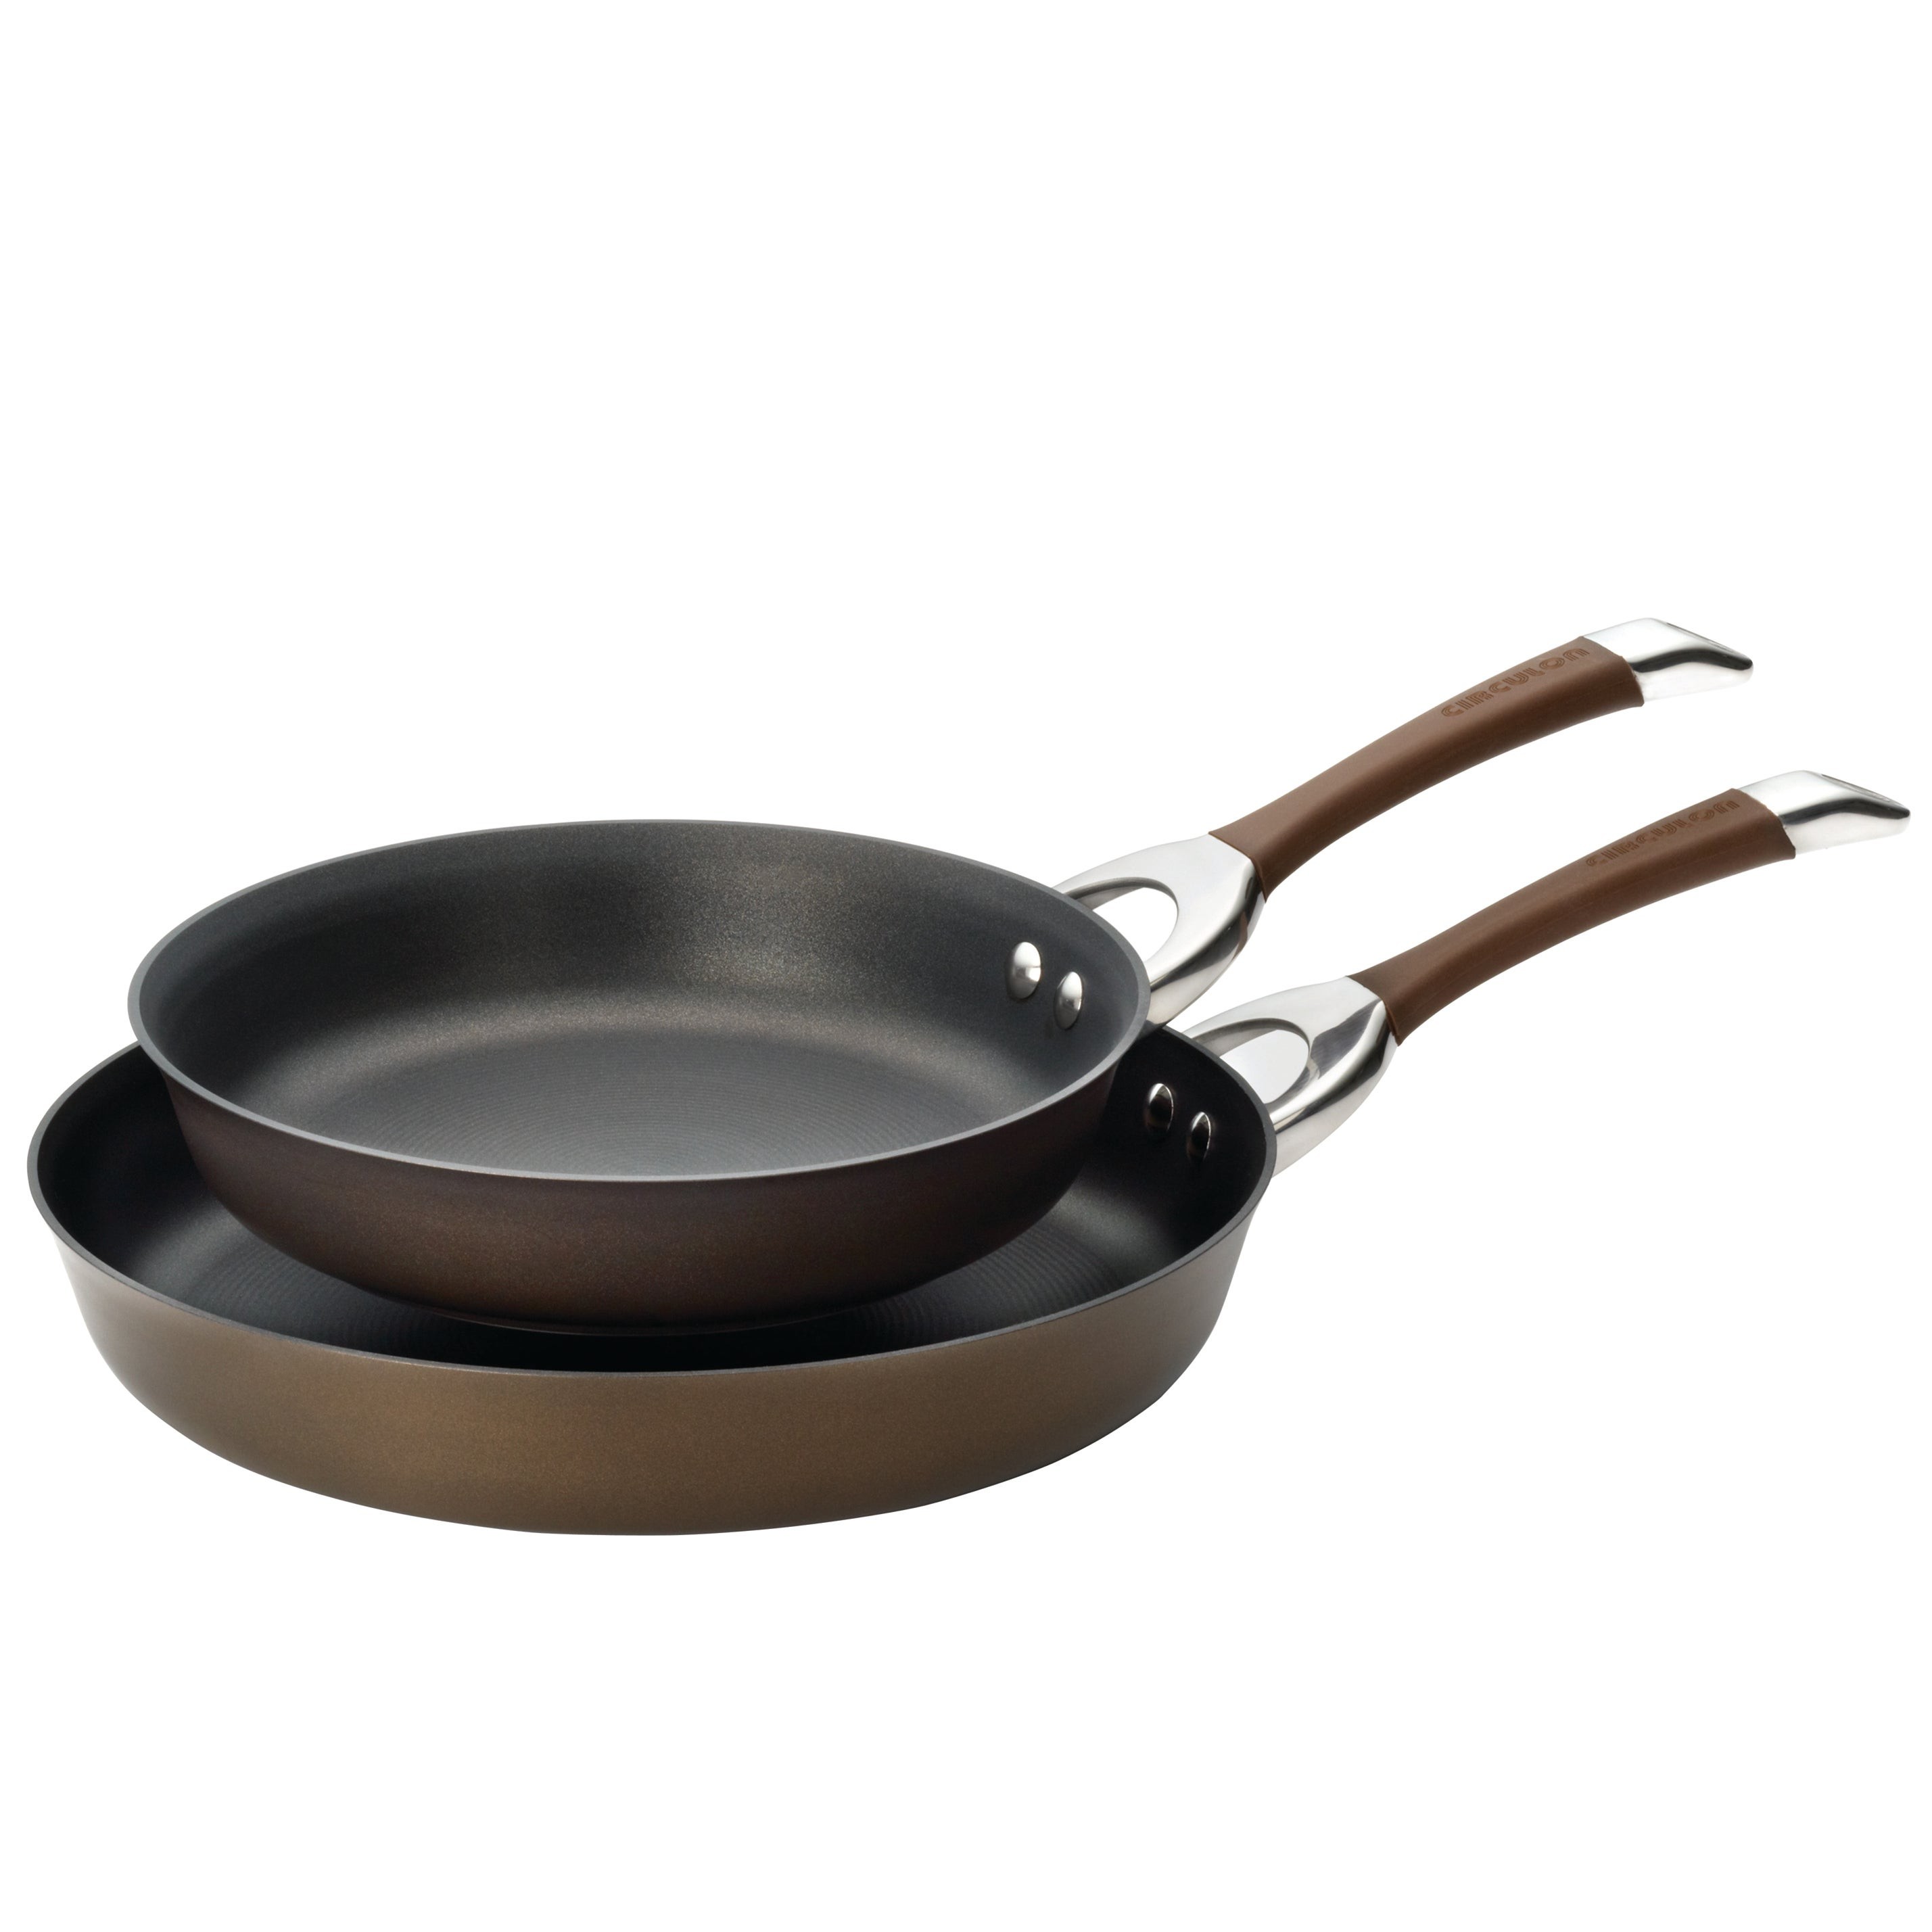 Symmetry Hard-Anodized Nonstick 10" & 12" Skillets Chocolate